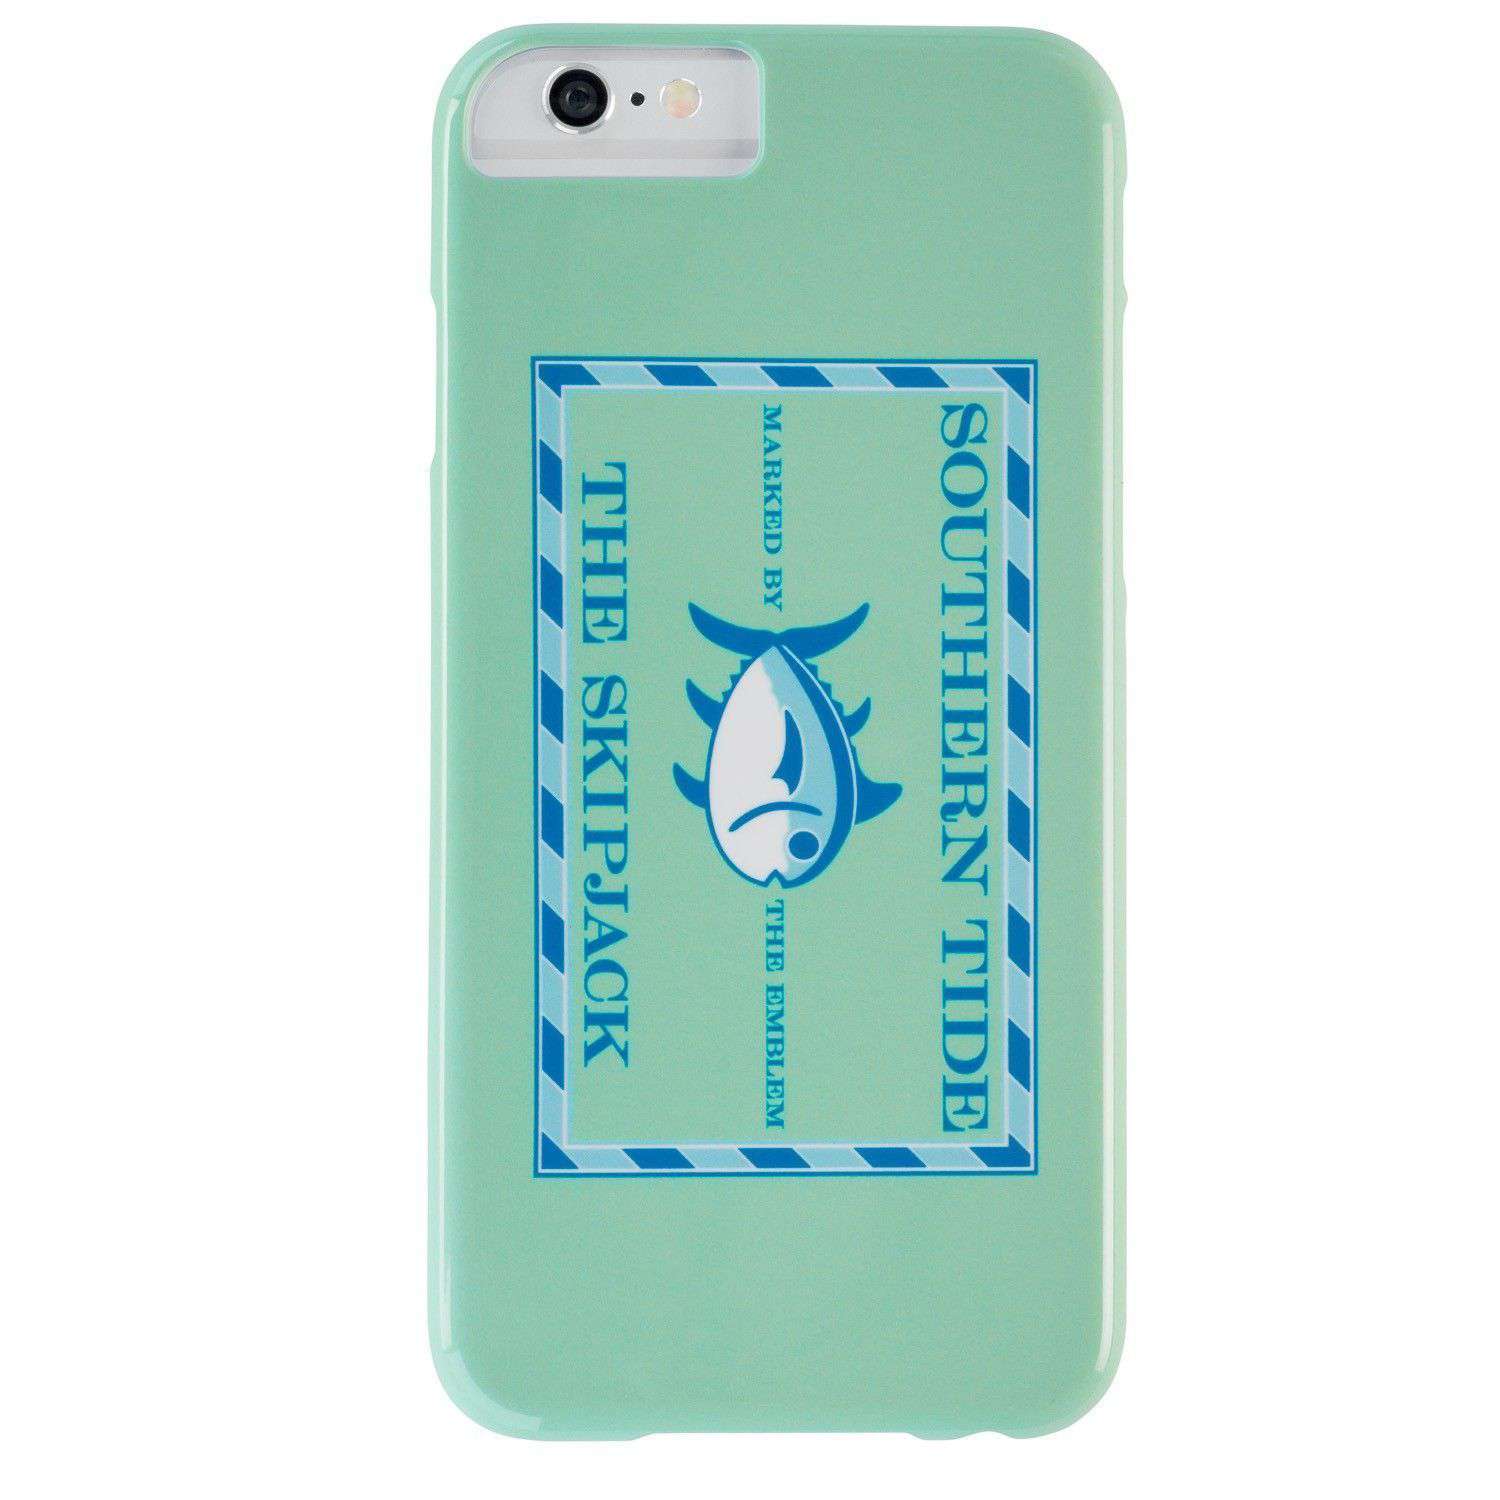 Original Skipjack iPhone 6/6s Case in Offshore Green by Southern Tide - Country Club Prep